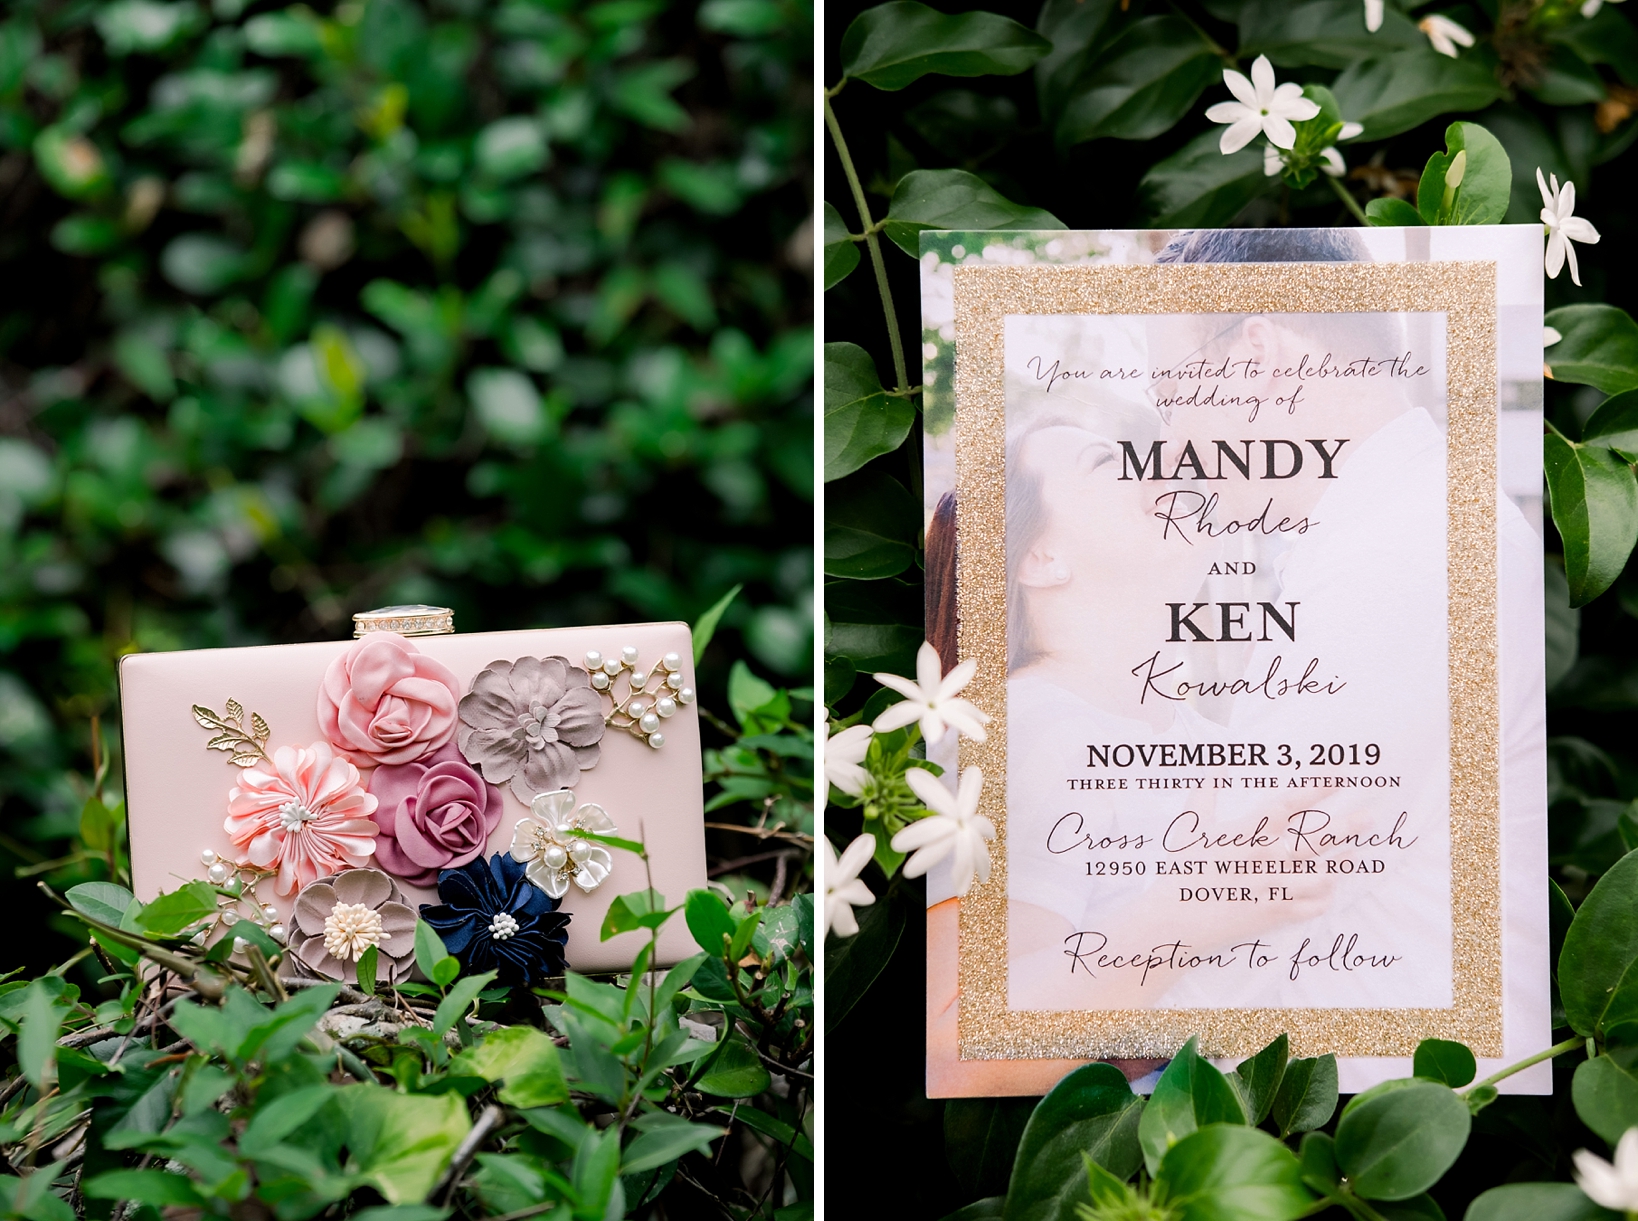 Bride's floral purse and wedding invitation against the trees on the cross creek ranch property